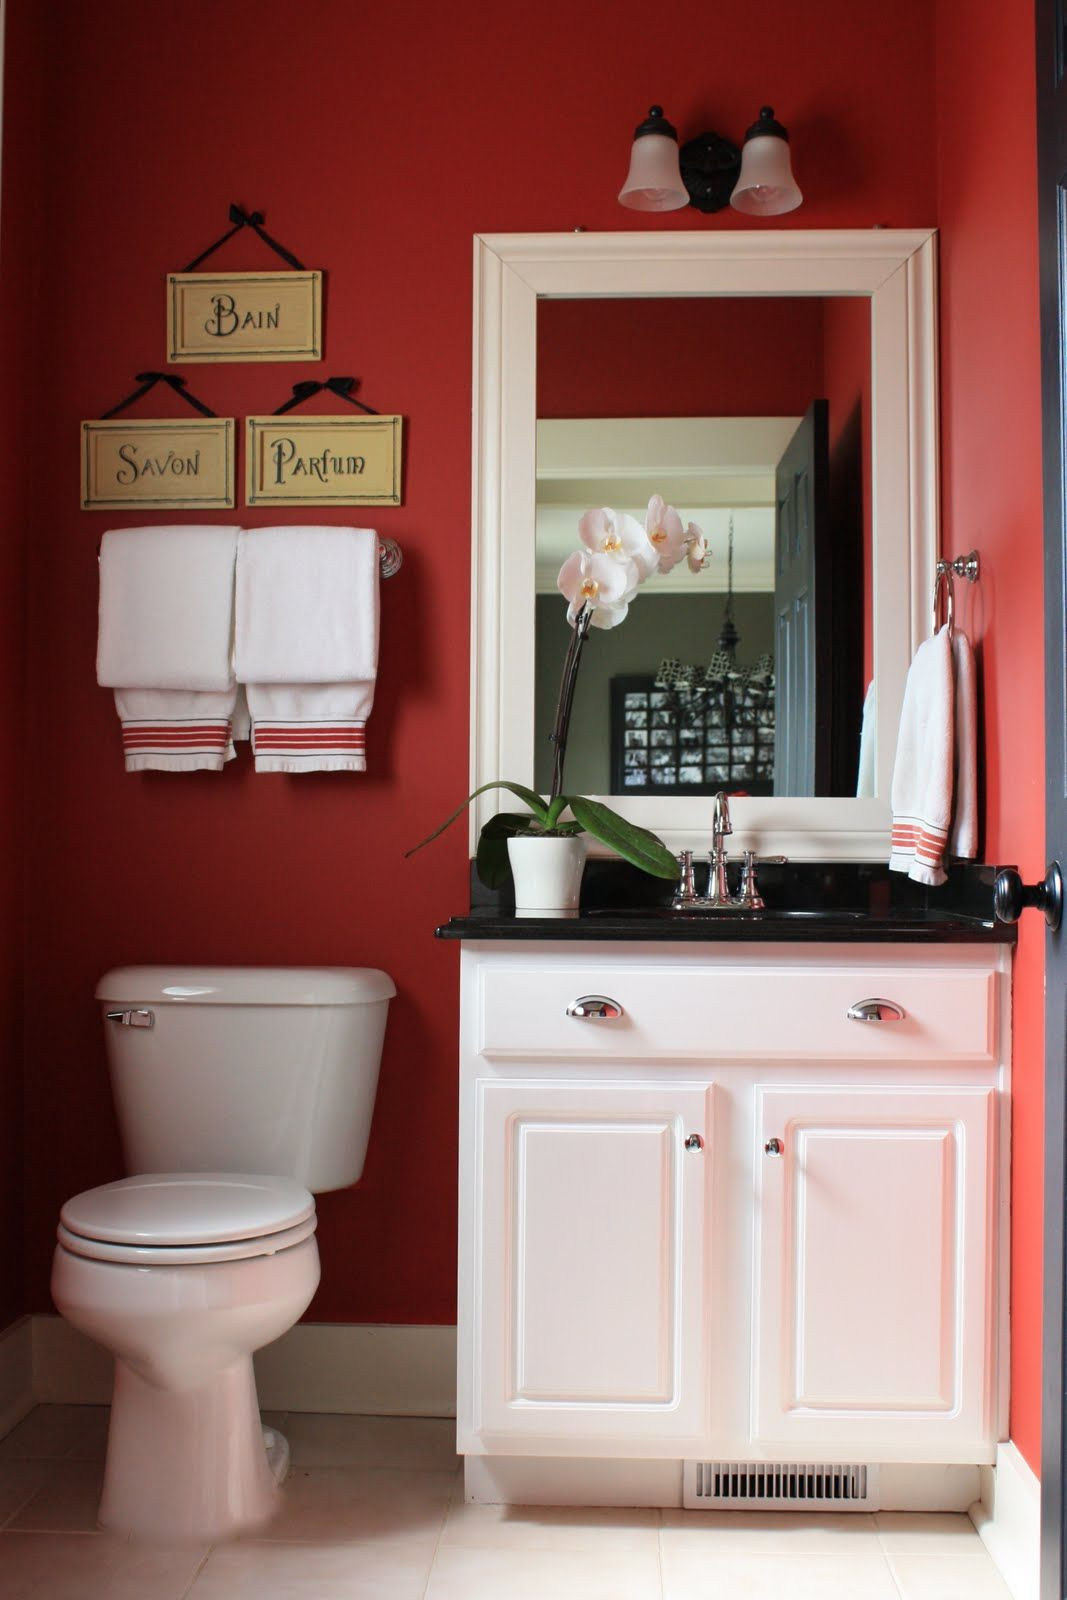 Red Bathroom Decor
 Daily Dream Decor Page 3 of 306 design food and